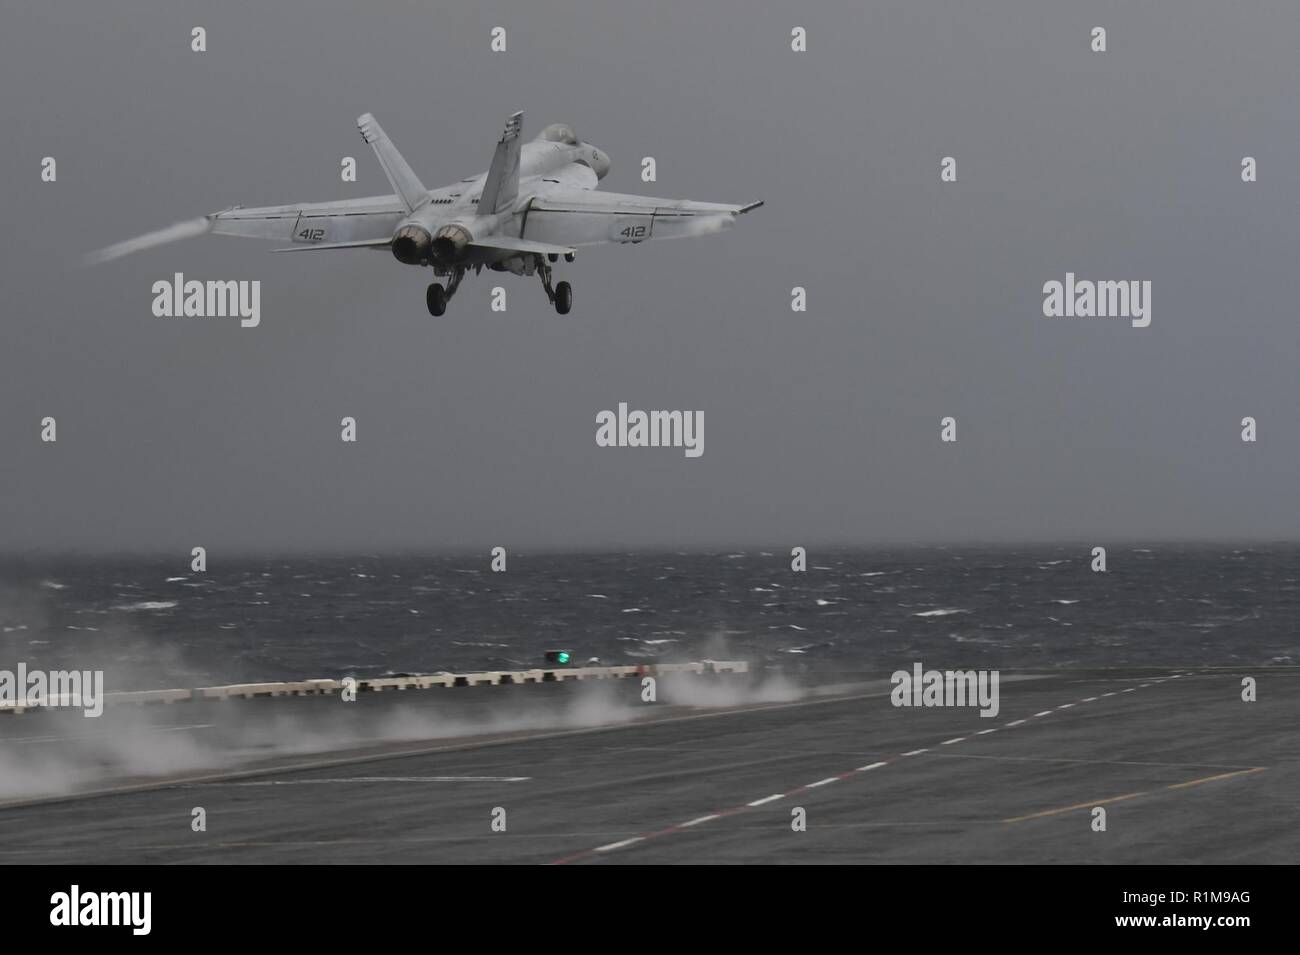 NORWEGIAN SEA (Oct. 22, 2018) An F/A-18E Super Hornet, assigned to the “Sunliners” of Strike Fighter Squadron (VFA) 81, launches from the Nimitz-class aircraft carrier USS Harry S. Truman (CVN 75). Currently operating in the U.S. Sixth Fleet area of operations, Harry S. Truman will continue to foster cooperation with regional allies and partners, strengthen regional stability, and remain vigilant, agile and dynamic. Stock Photo